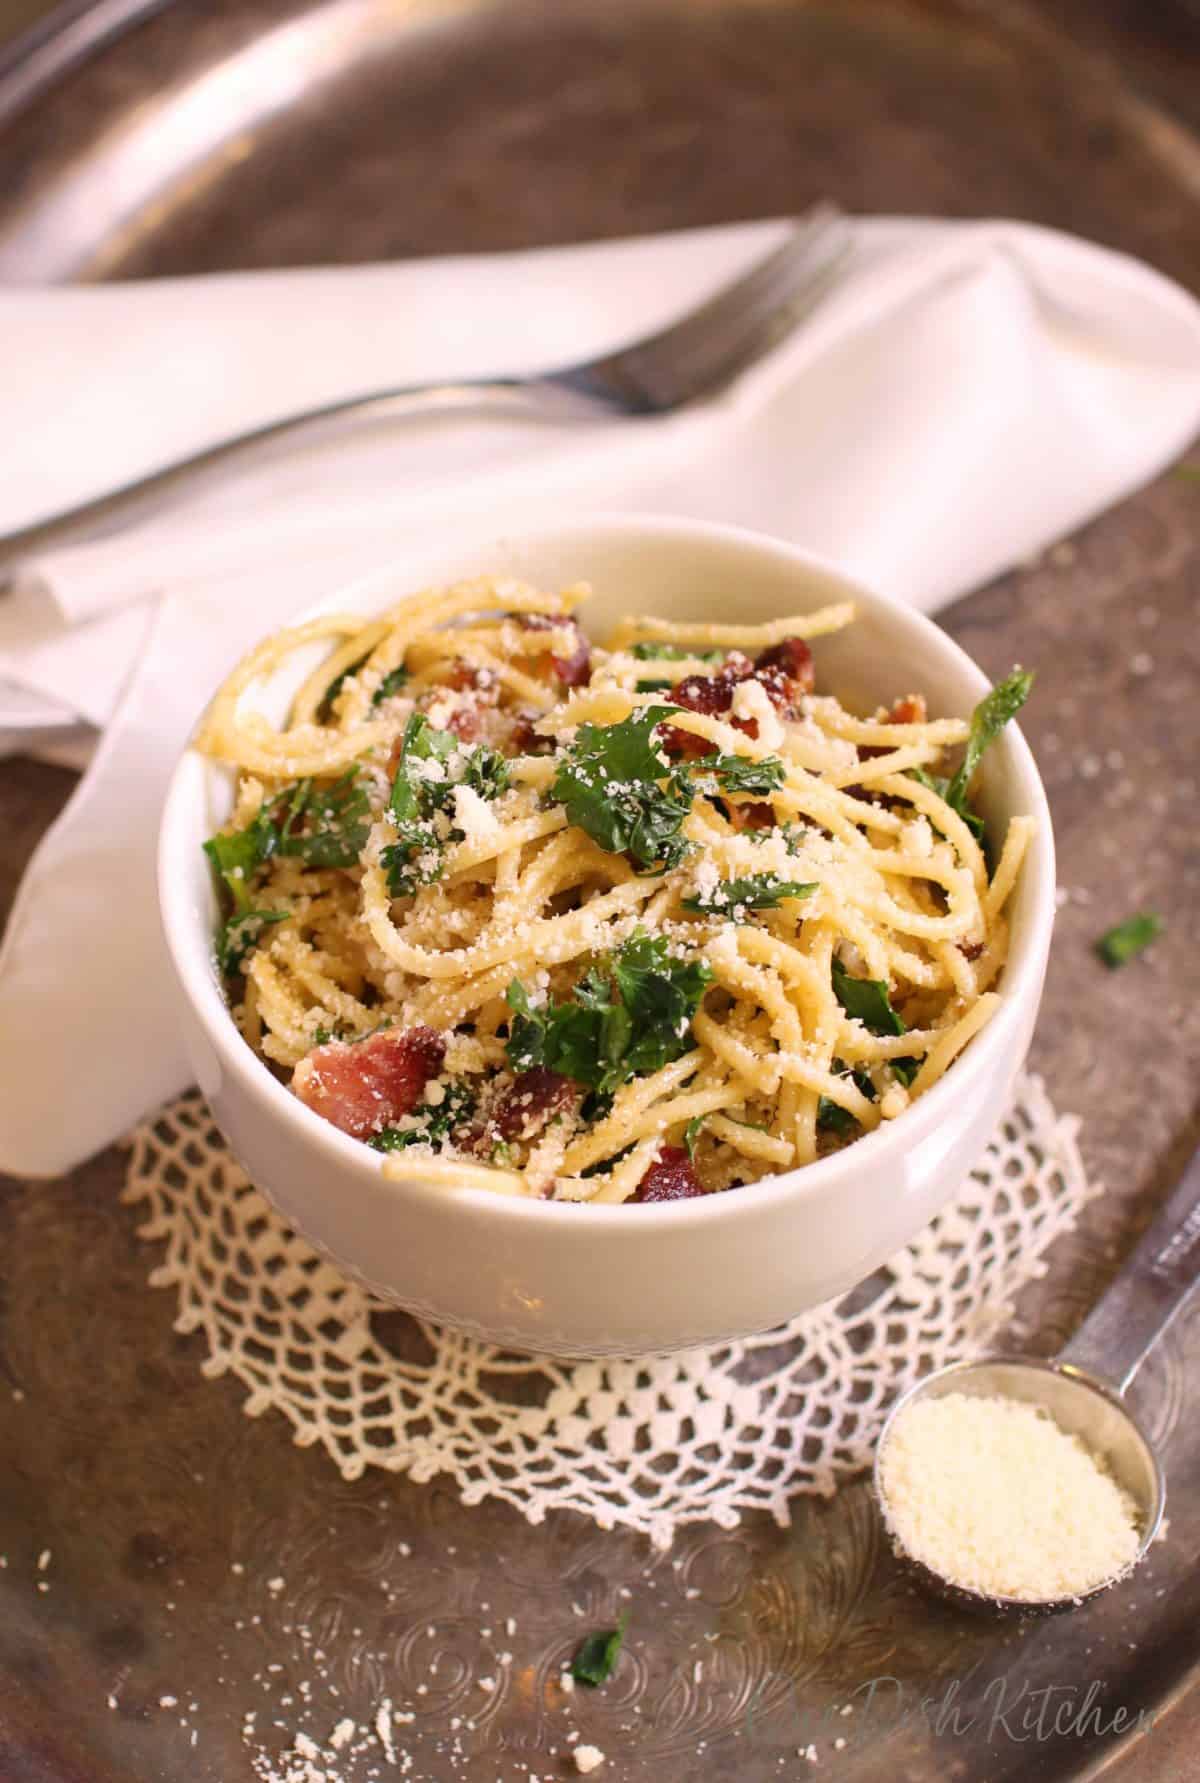 An overhead view of a bowl of pasta carbonara topped with chopped parsley and parmesan cheese next to a white cloth napkin, a fork, and measuring spoon of grated parmesan cheese all on a metal tray.